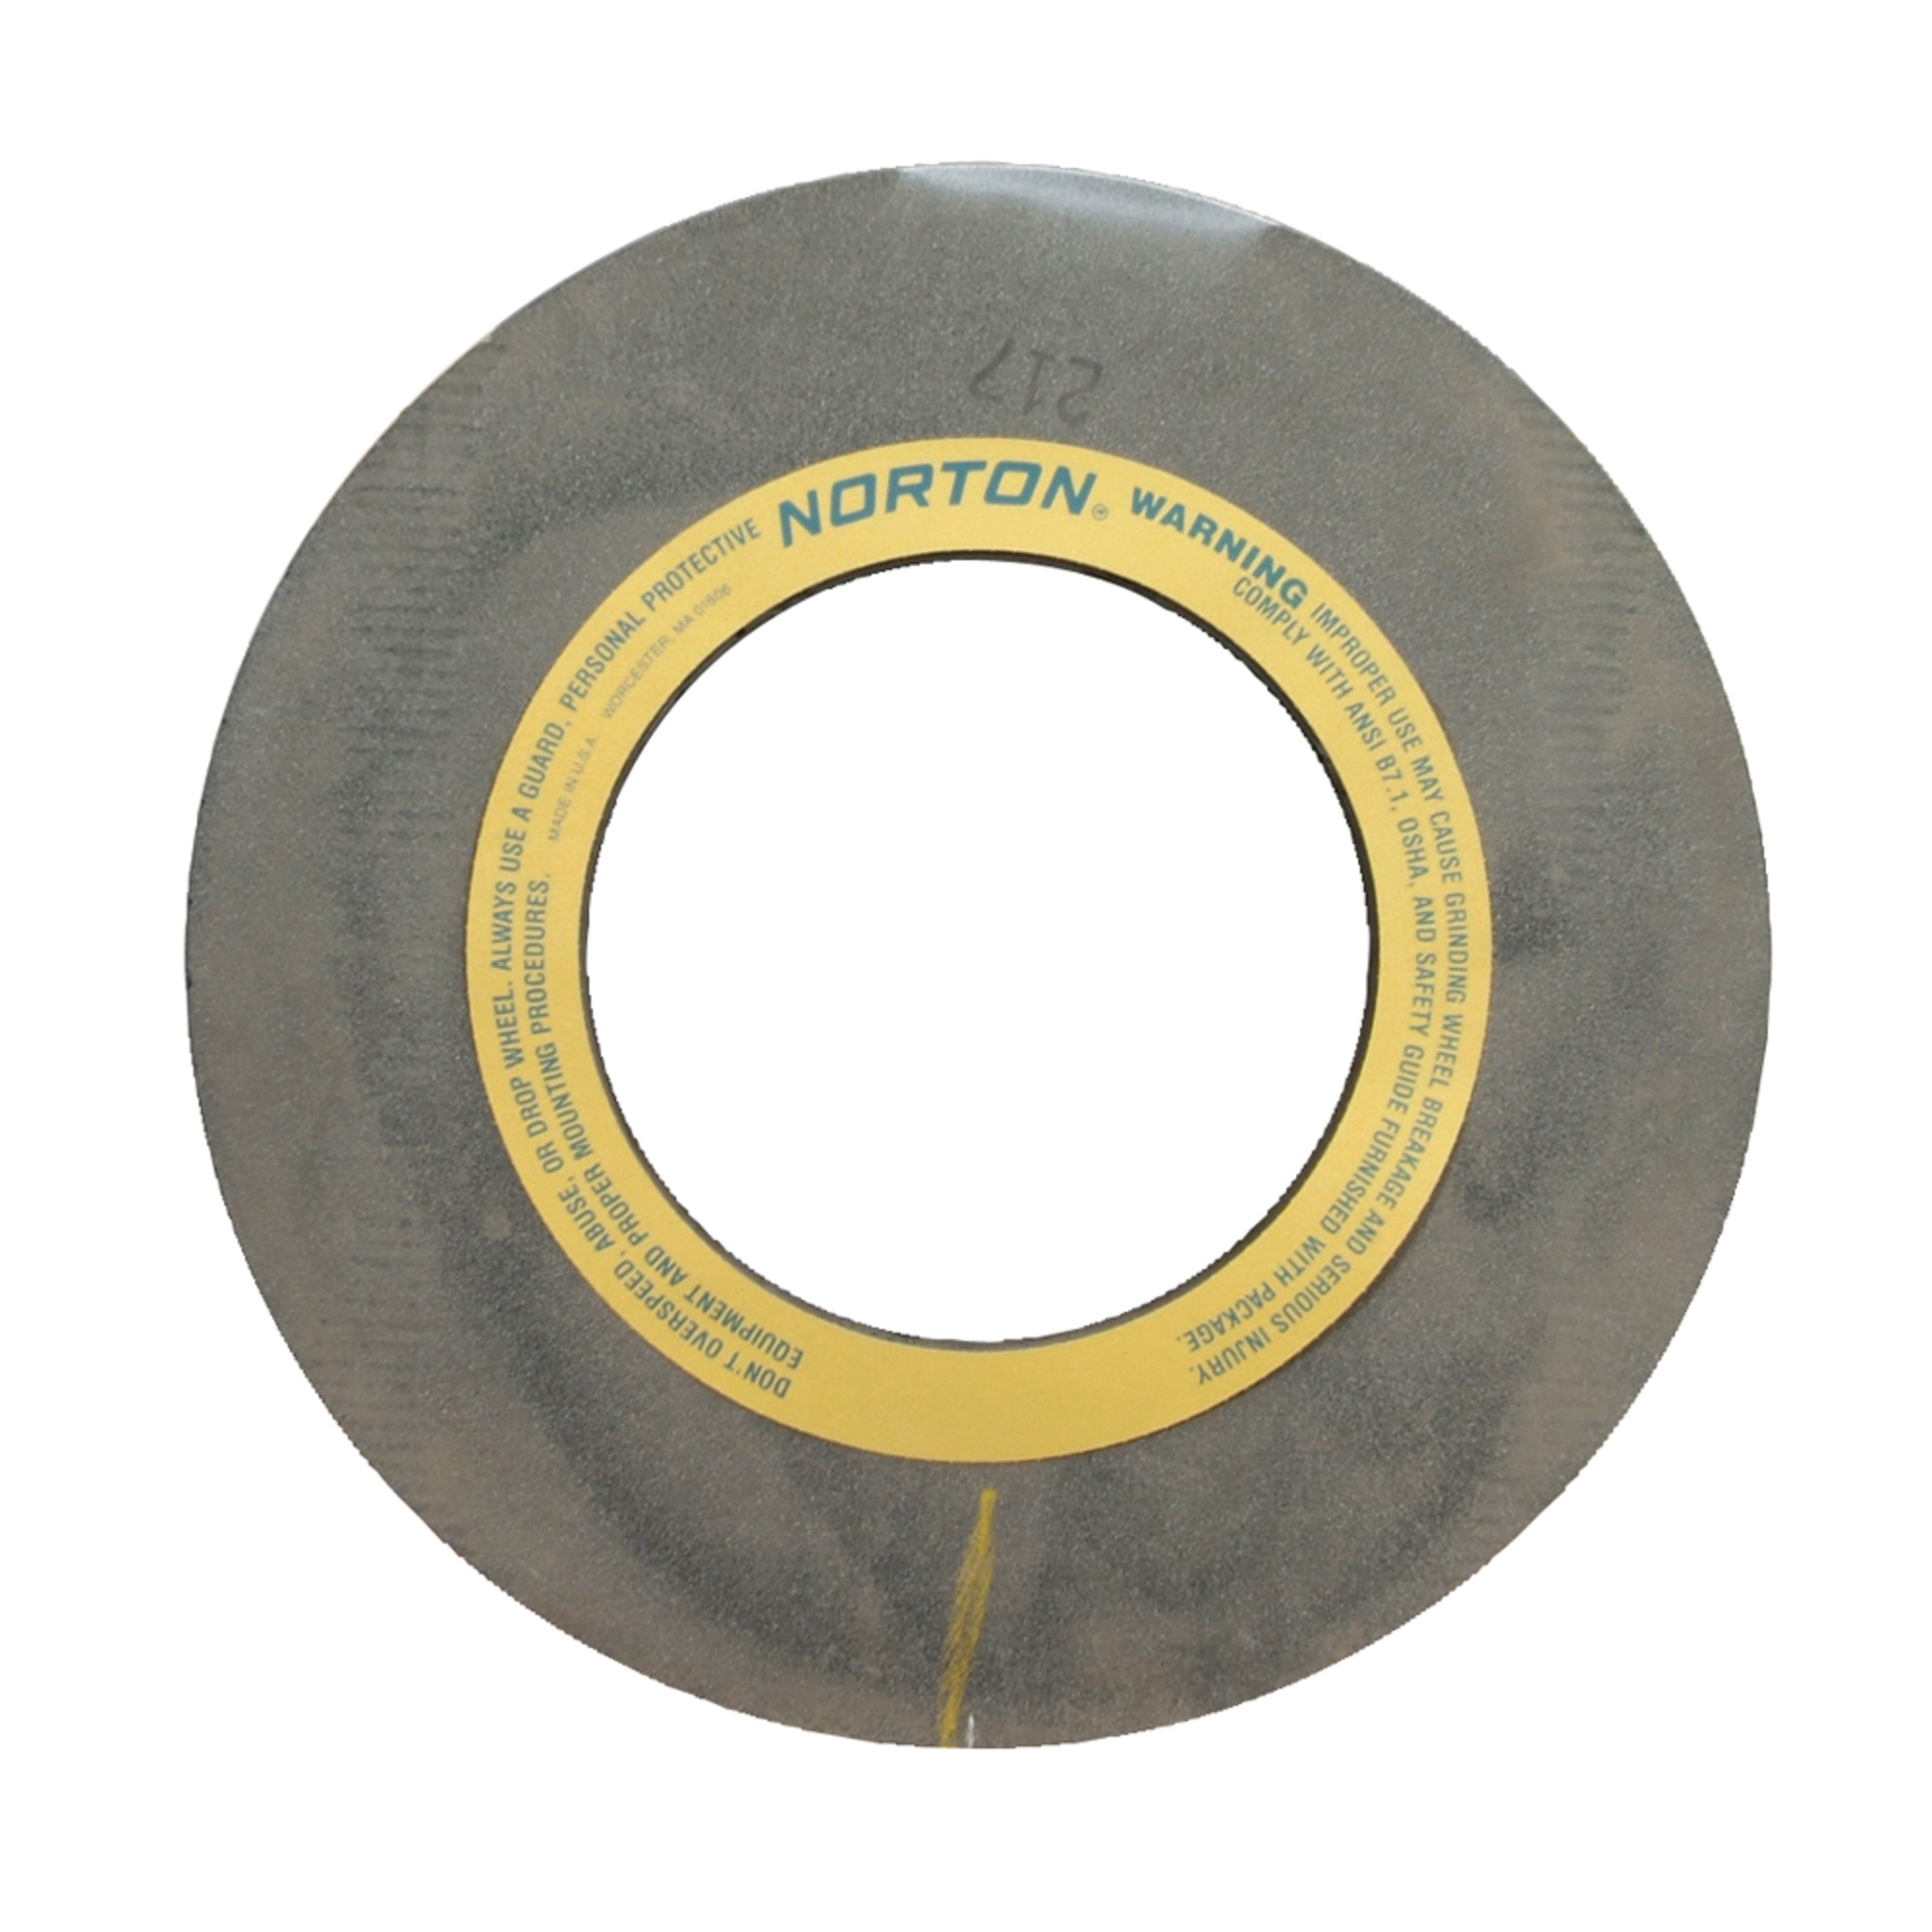 Norton® 69083166552 32A Straight Centerless Grinding Wheel, 24 in Dia x 20 in THK, 305 mm Center Hole, 54 Grit, Aluminum Oxide Abrasive